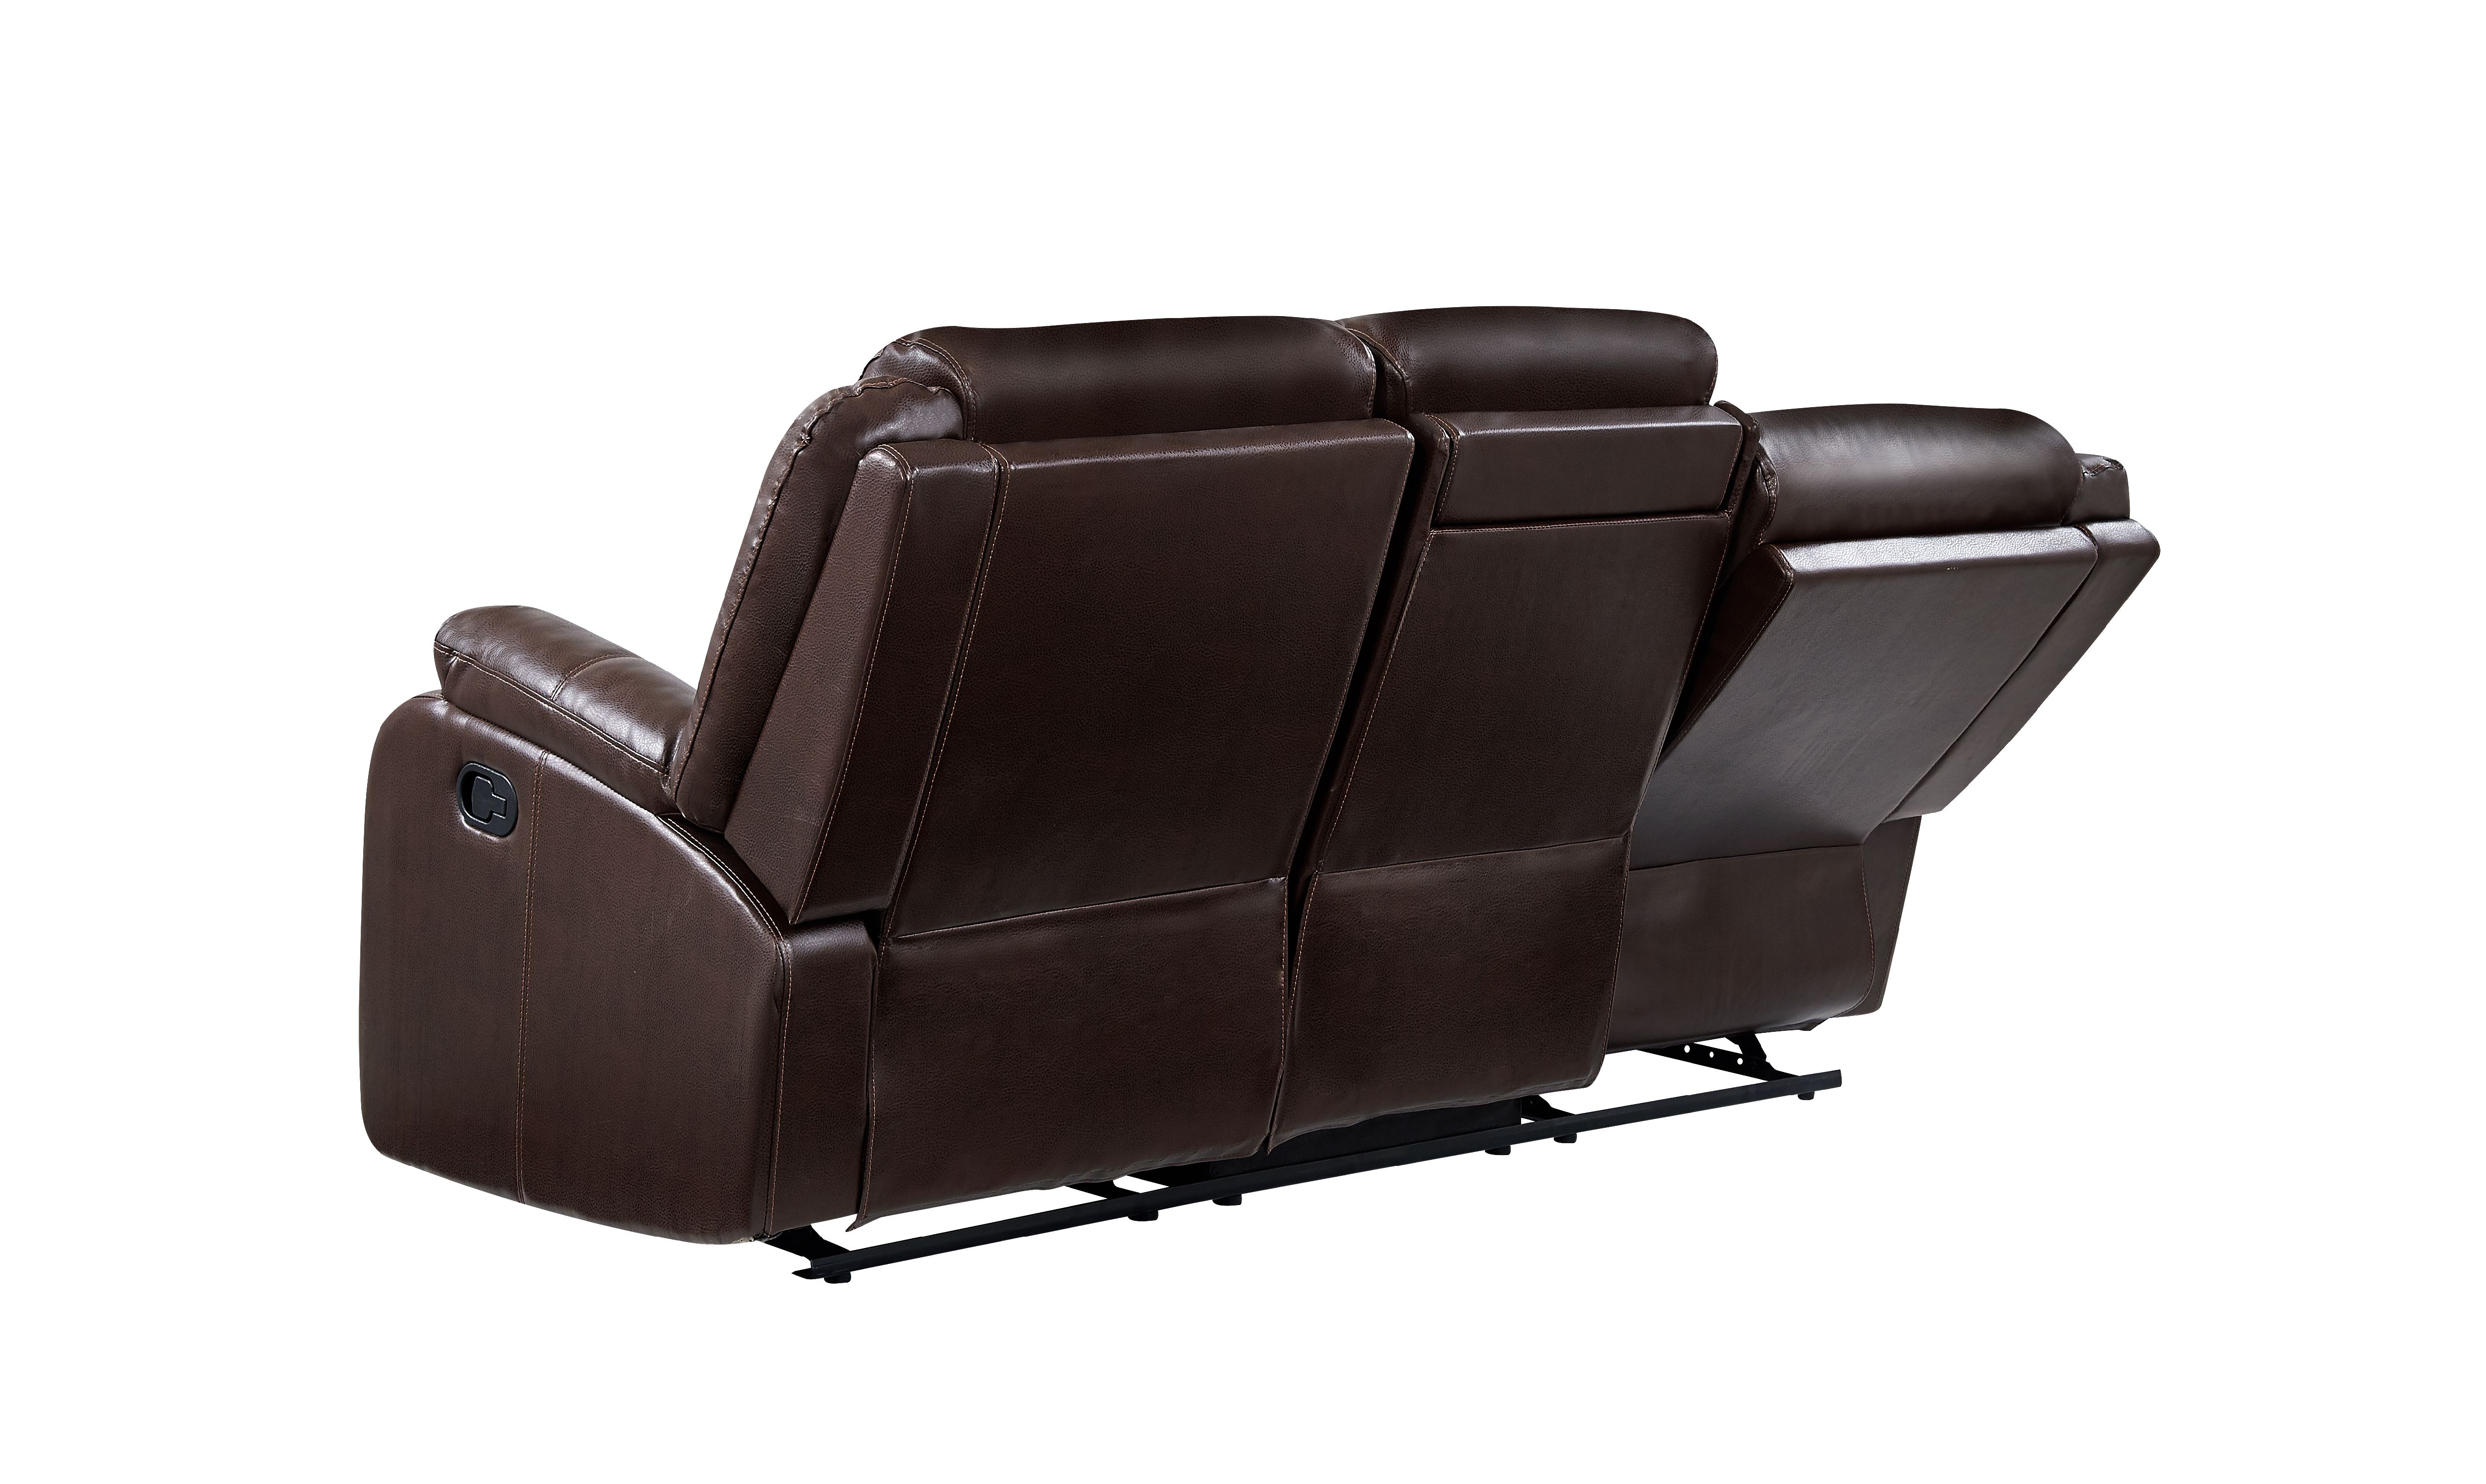 Drawer Reclining Sofa in Brown - image 7 of 10